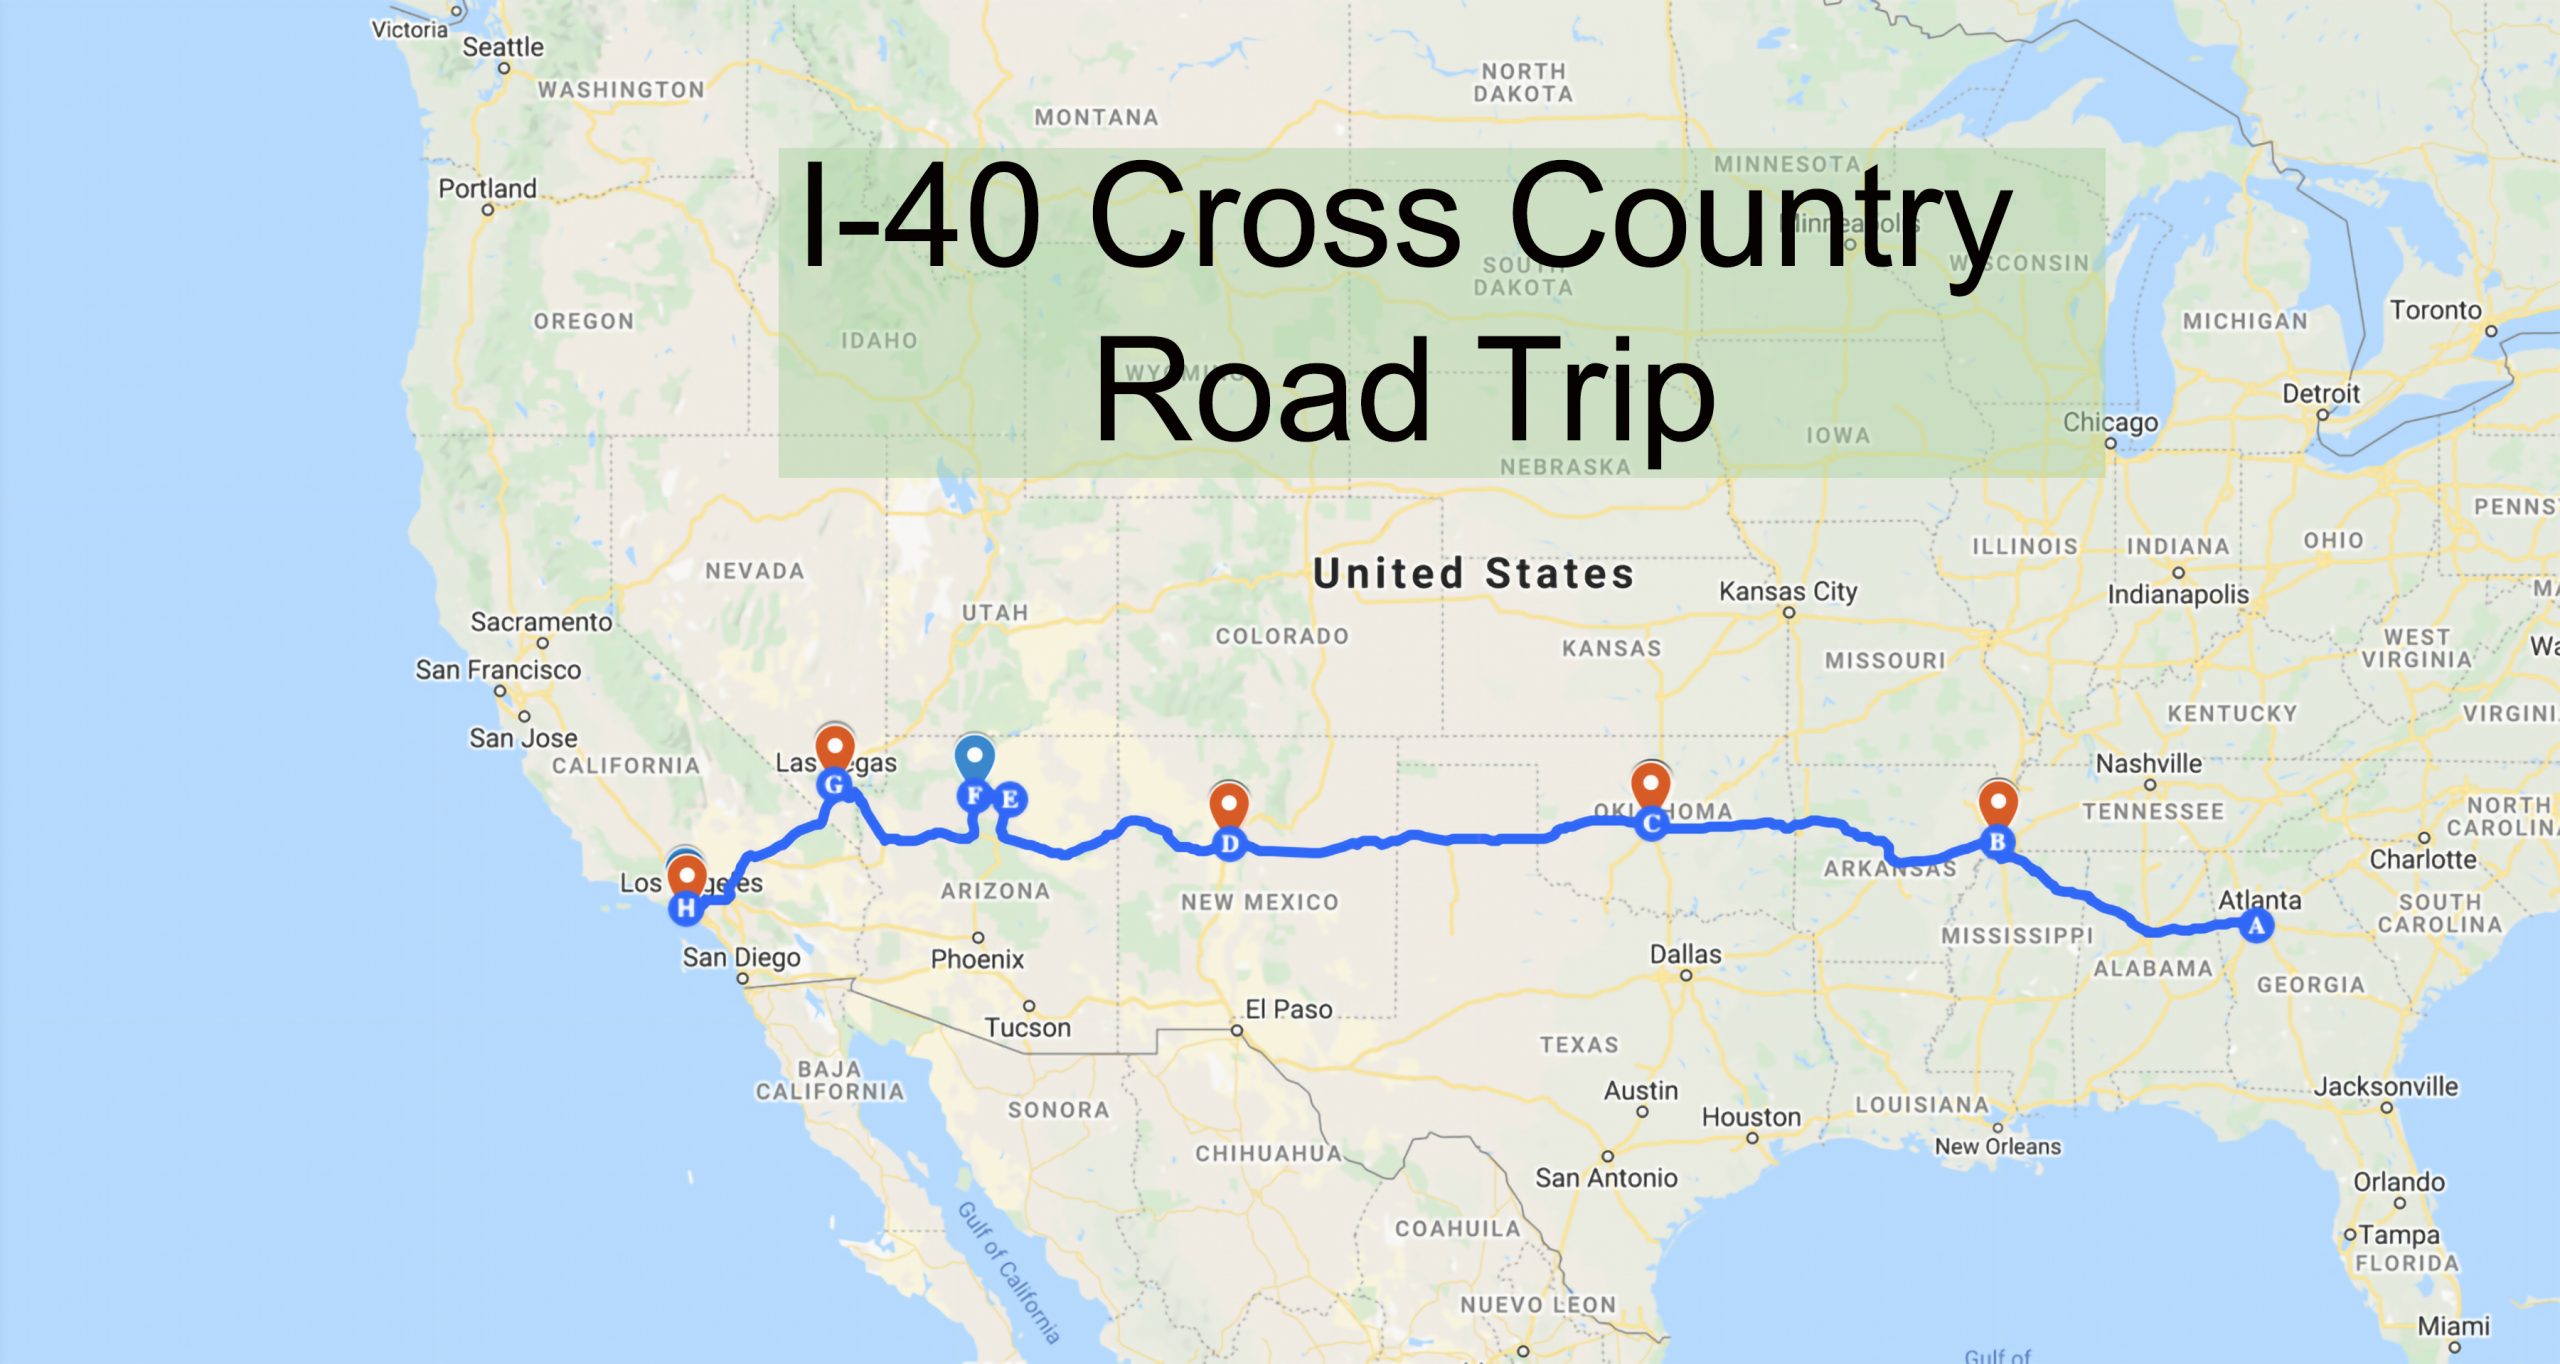 I-40 Cross Country Road Trip and Attractions